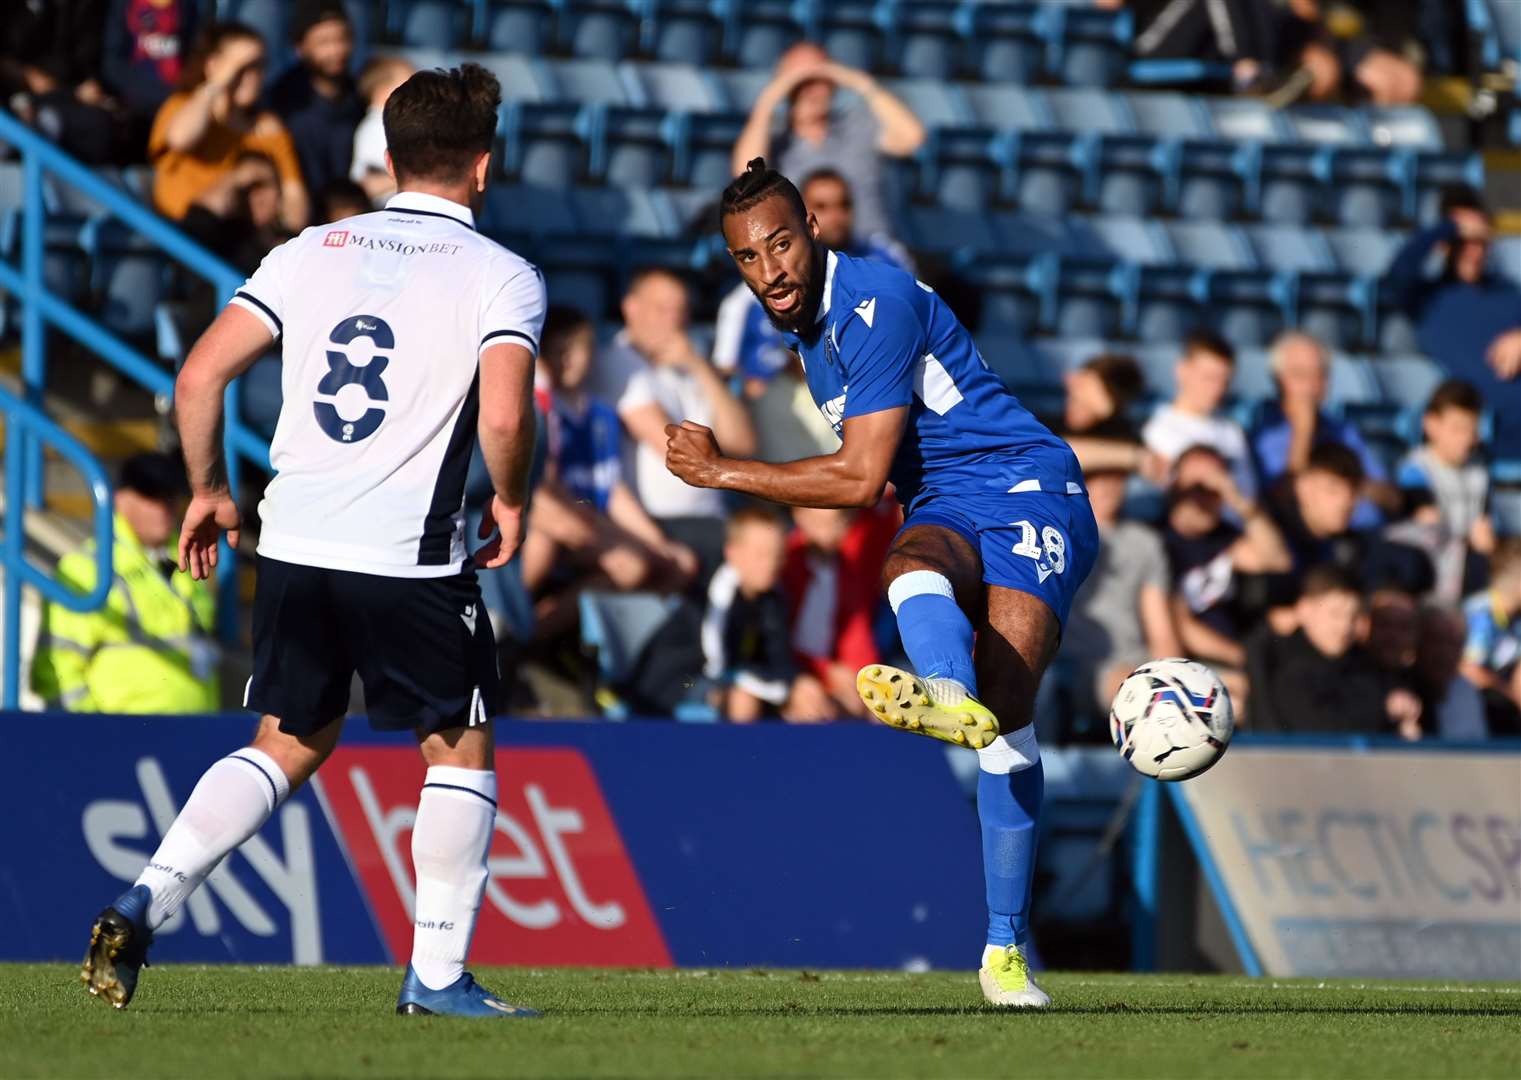 Rhys Bennett featured at full-back for Gillingham against Millwall on Tuesday night. Picture: Barry Goodwin (49649909)